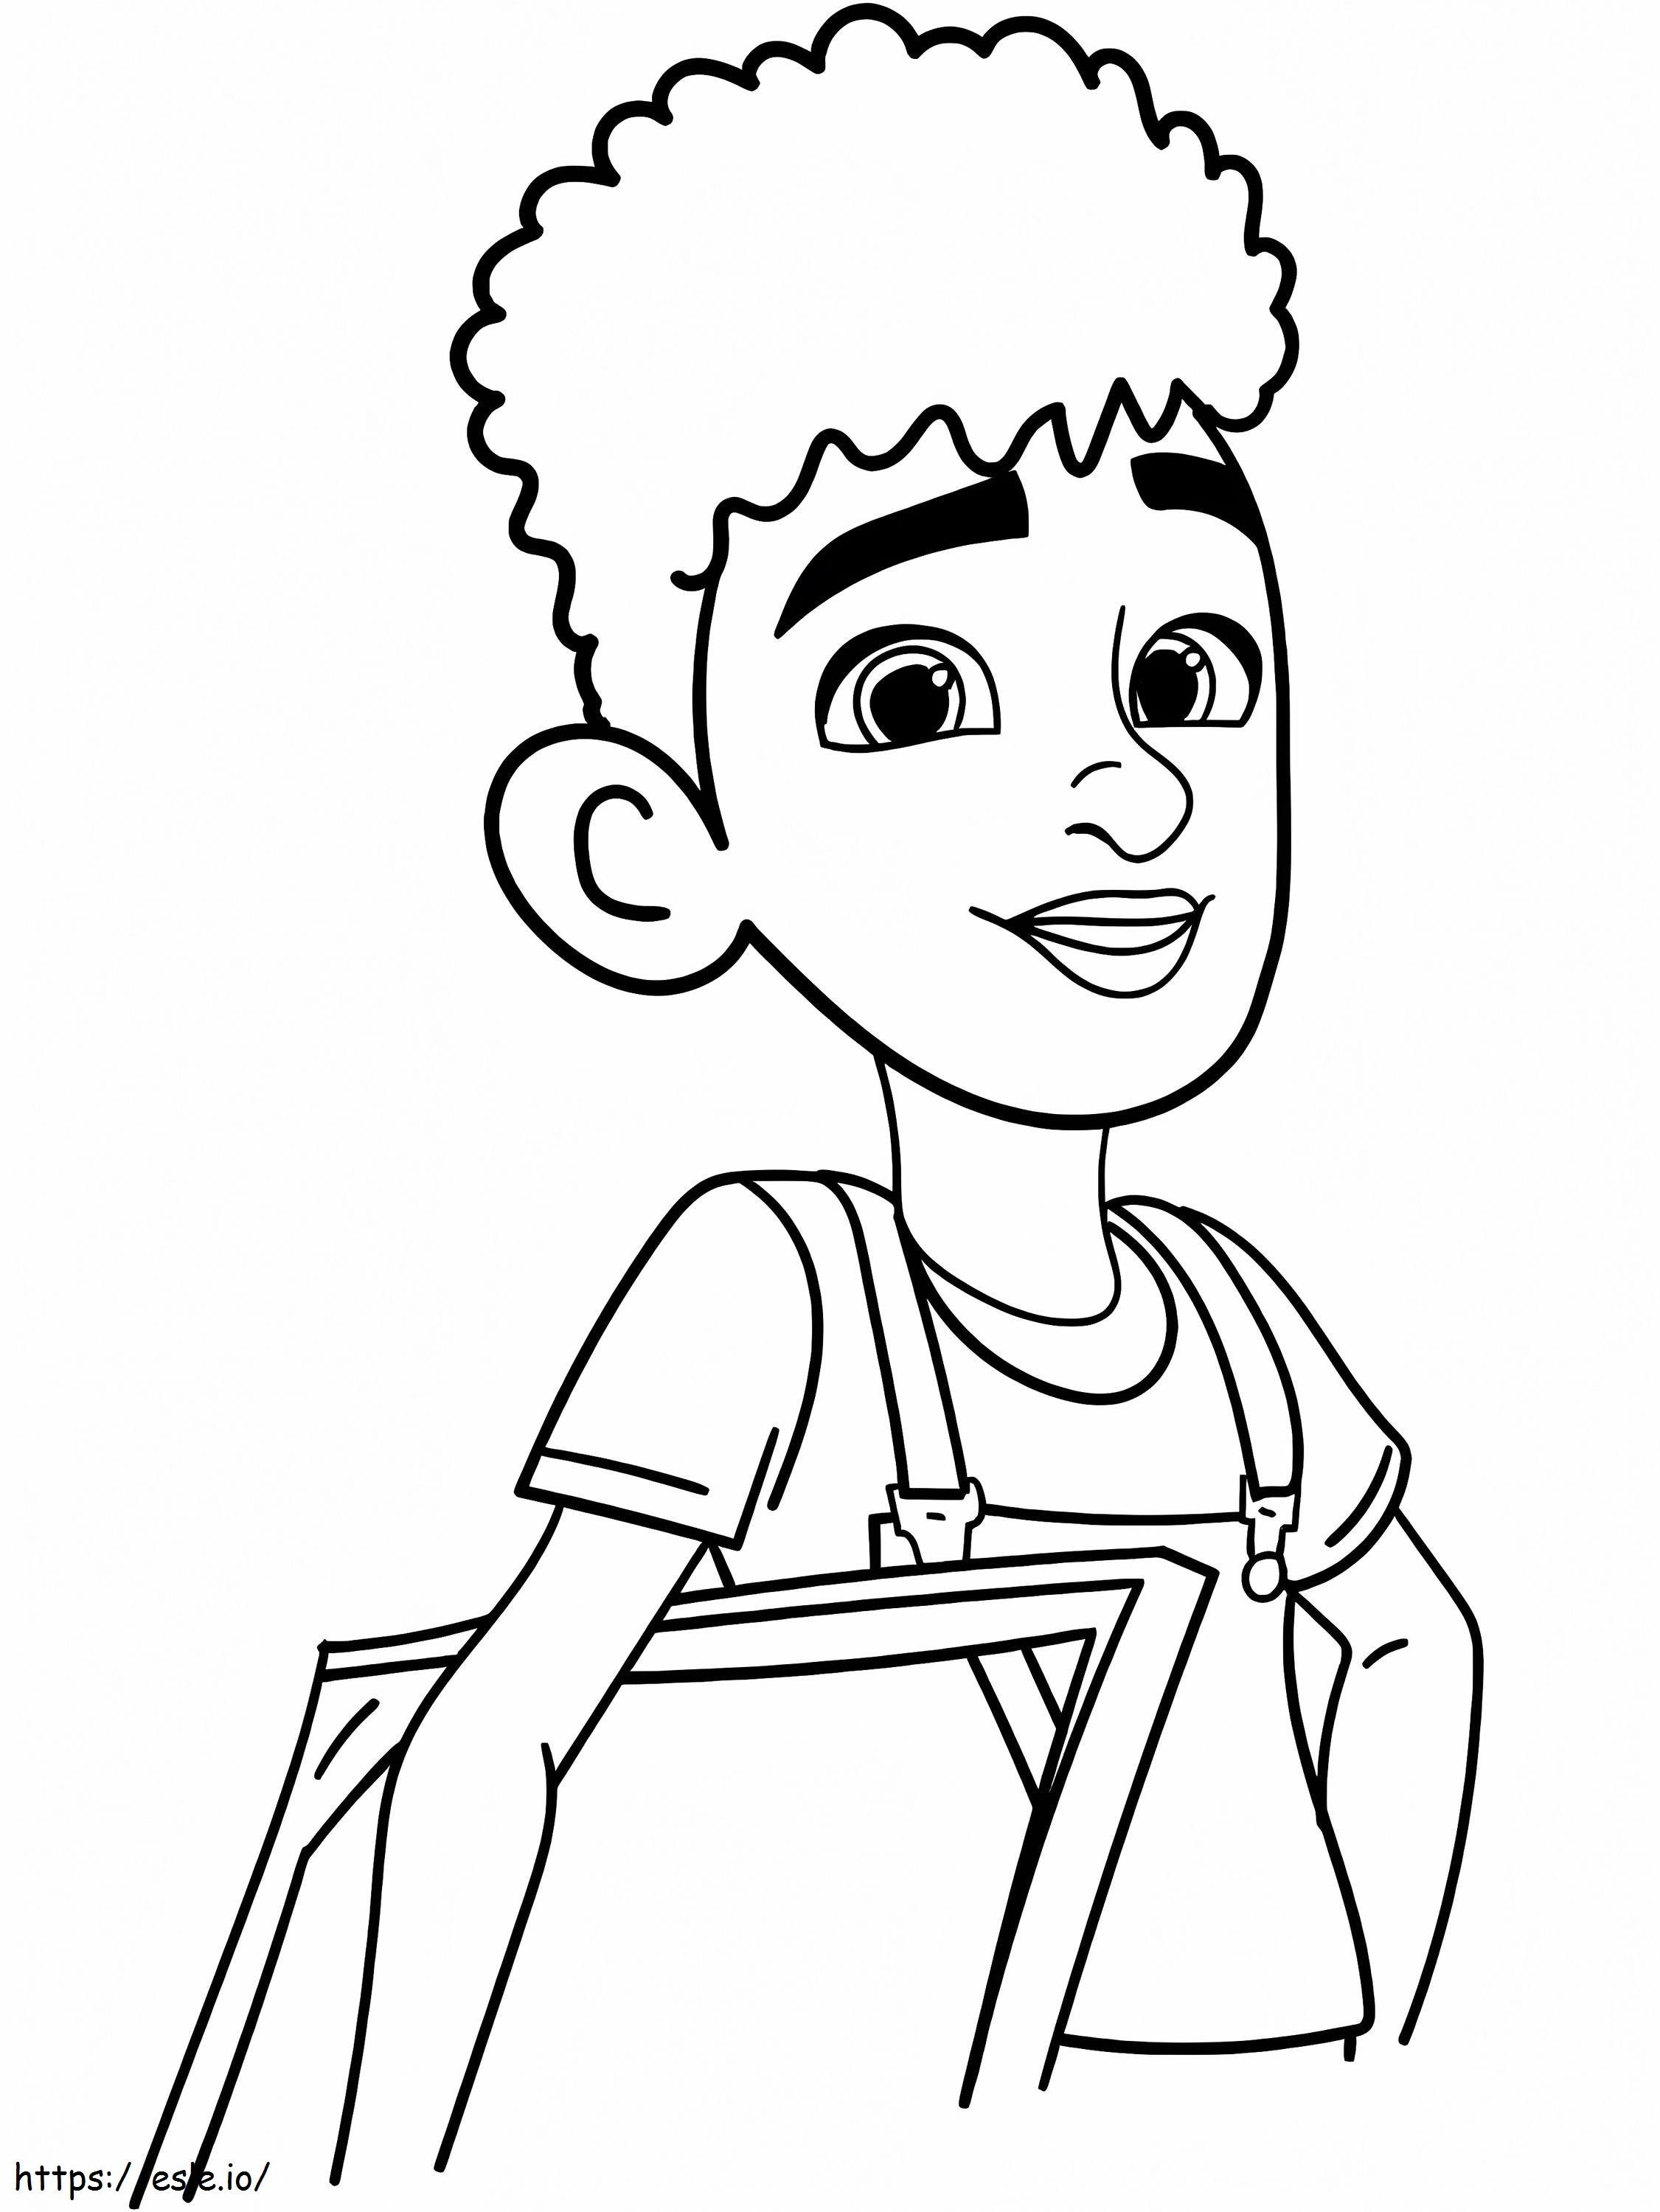 Winston Torres From Karmas World coloring page